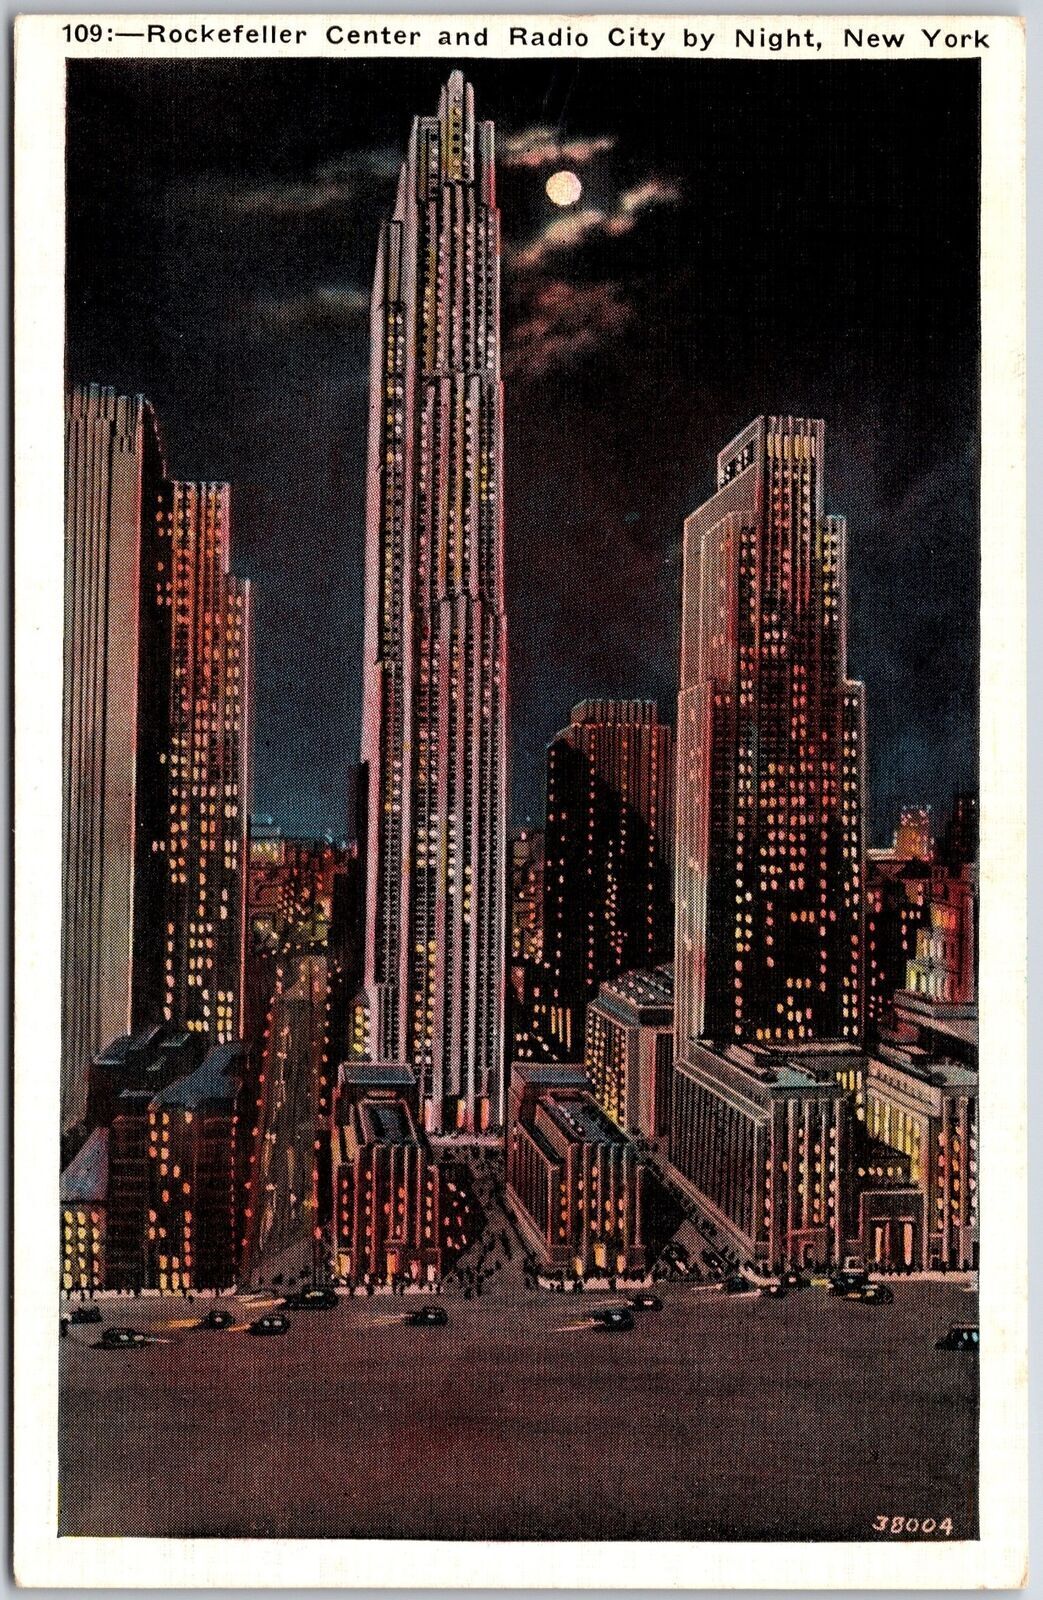 1935 Rockefeller Center And Radio City By Night New York NY Posted Postcard